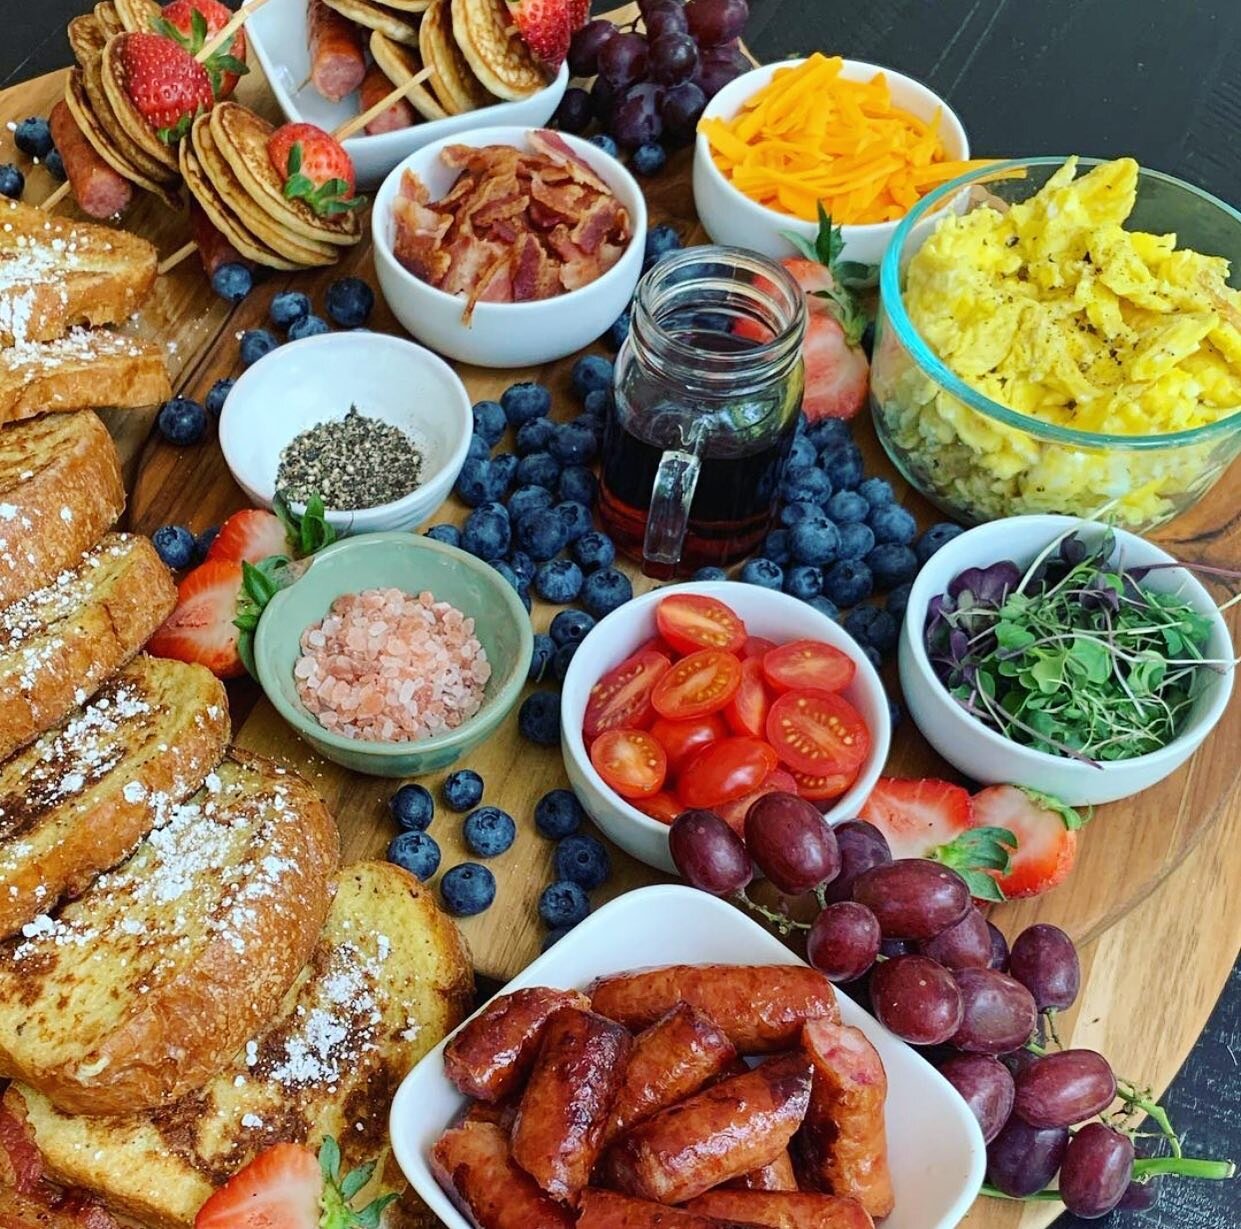 This brunch board game is ELITE 😍
.
.
Brought to you by our wildly talented friend @tallycheeseboards 
.
.
.
.
.
#registerssausage #registers #registerssausagelover #brunch #breakfast #brunchboard #sausage #smokedsausage #tallycheeseboards